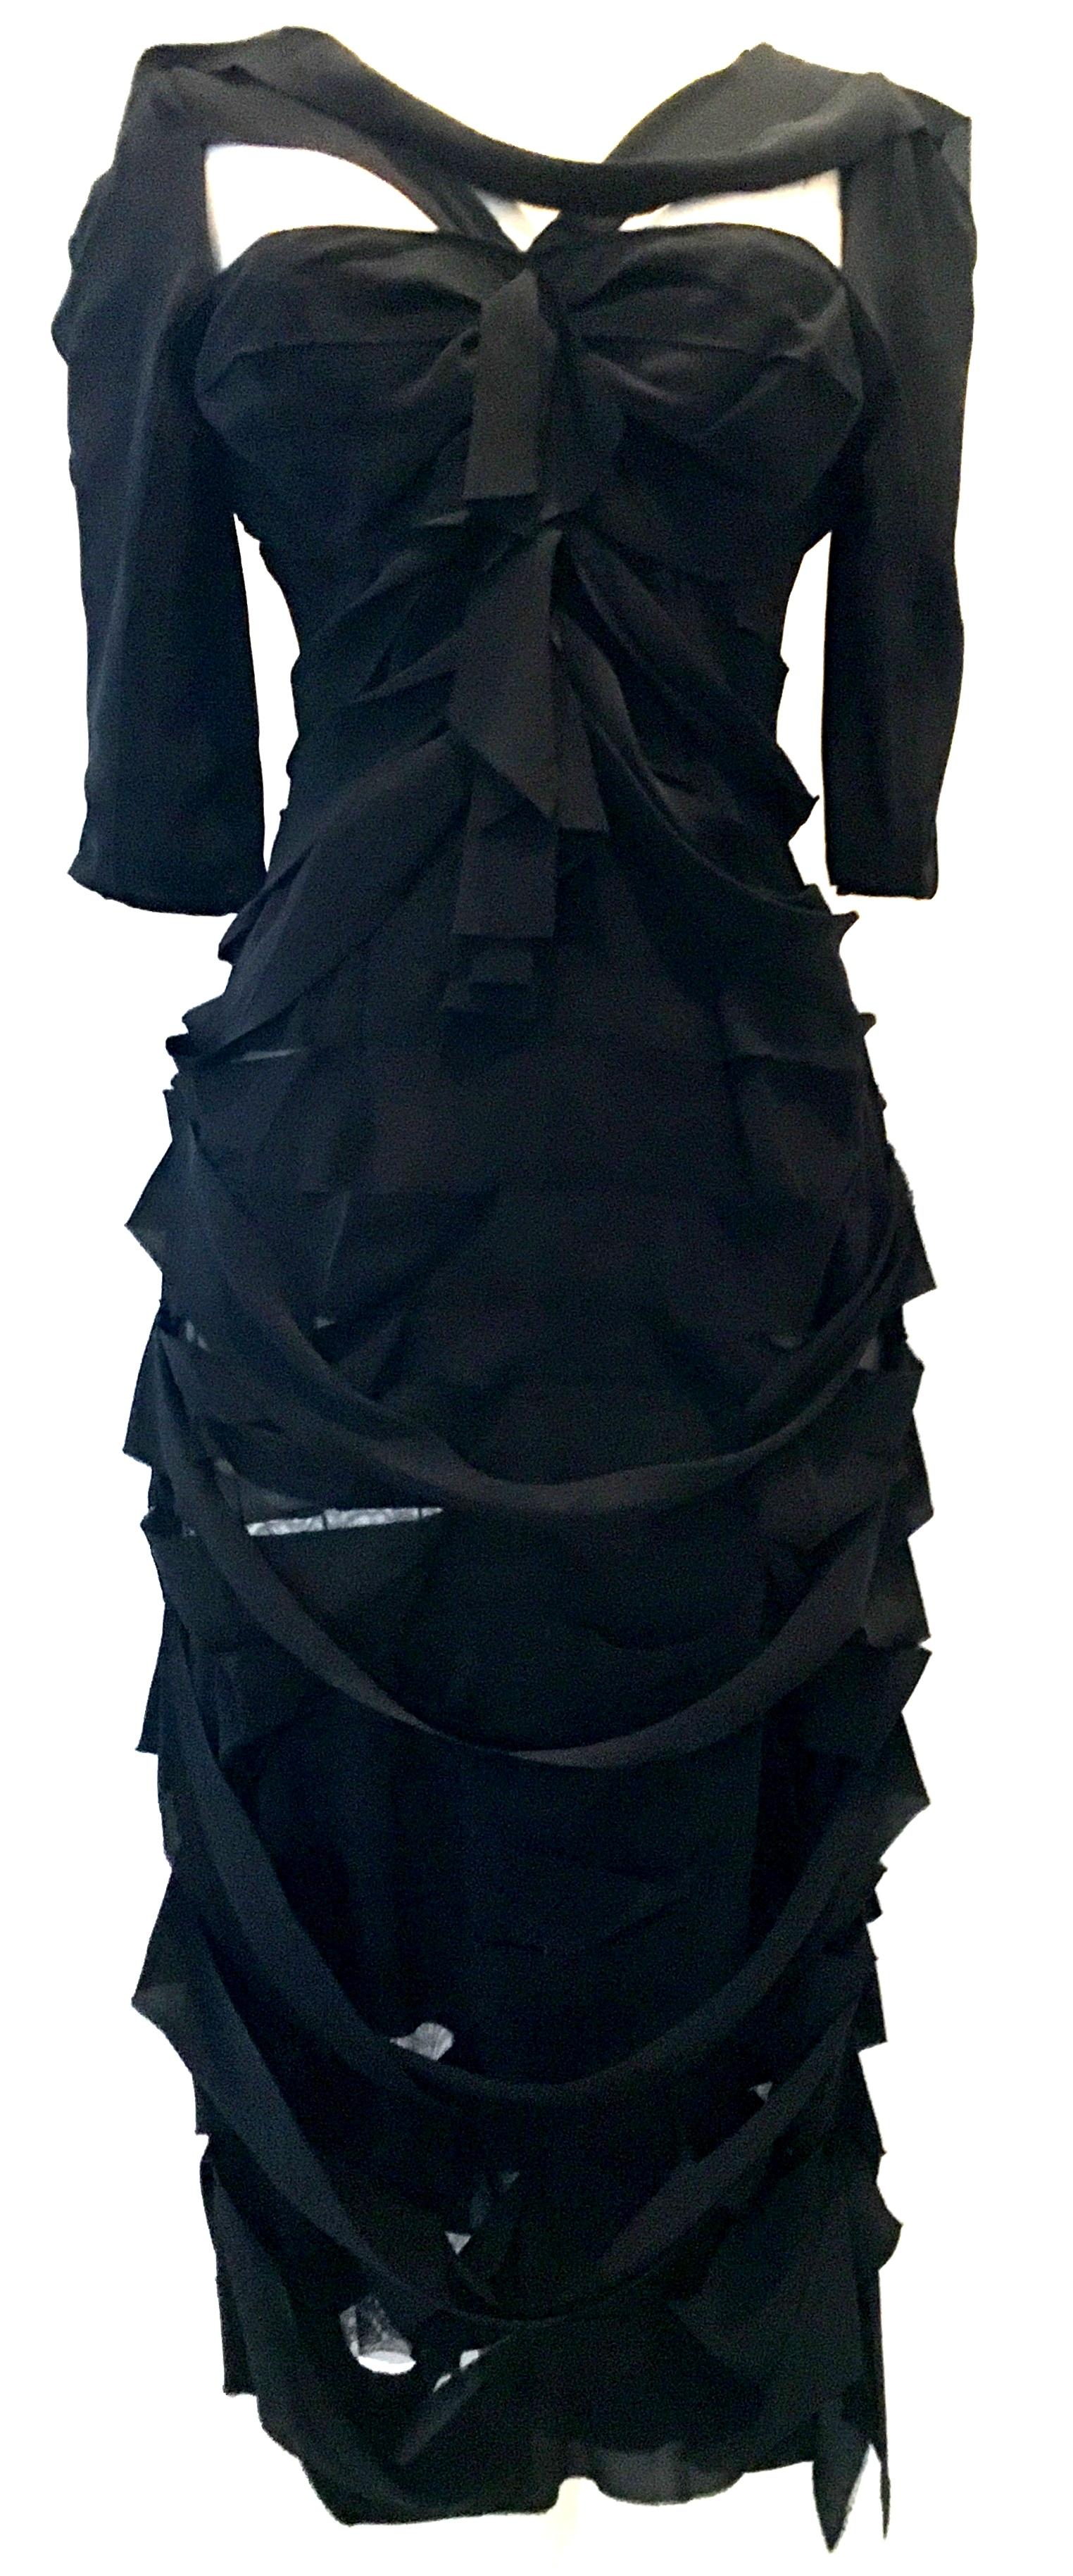 
21st Century & New French Silk Black Dress By, Nina Ricci Paris - Size 6. This finely crafted architectural creation of a 